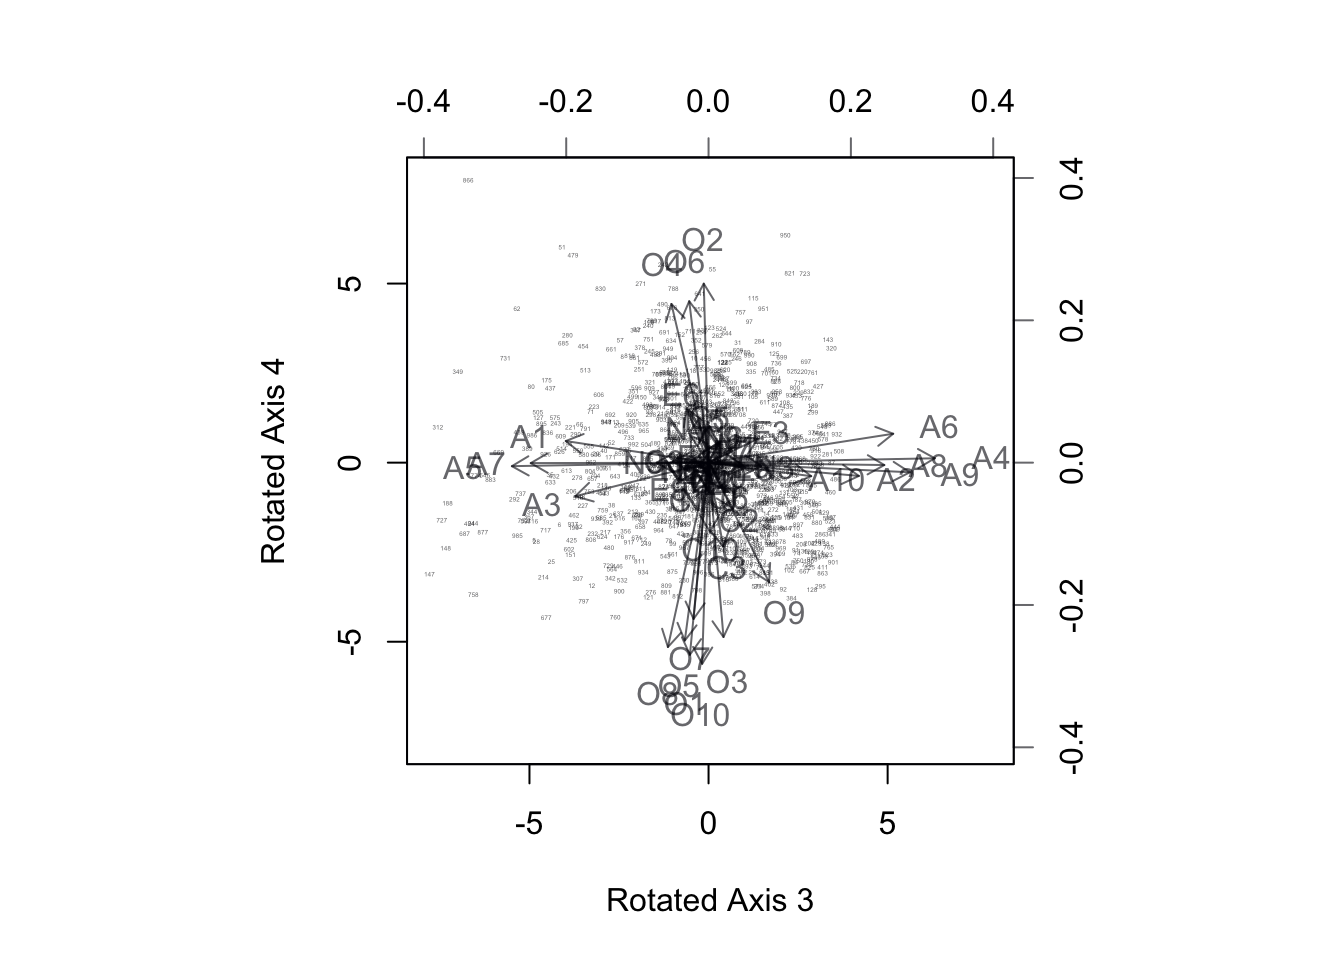 BiPlot of Projection onto Rotated Axes 3,4. Agreeableness questions align with axis 3, Openness with Axis 4.